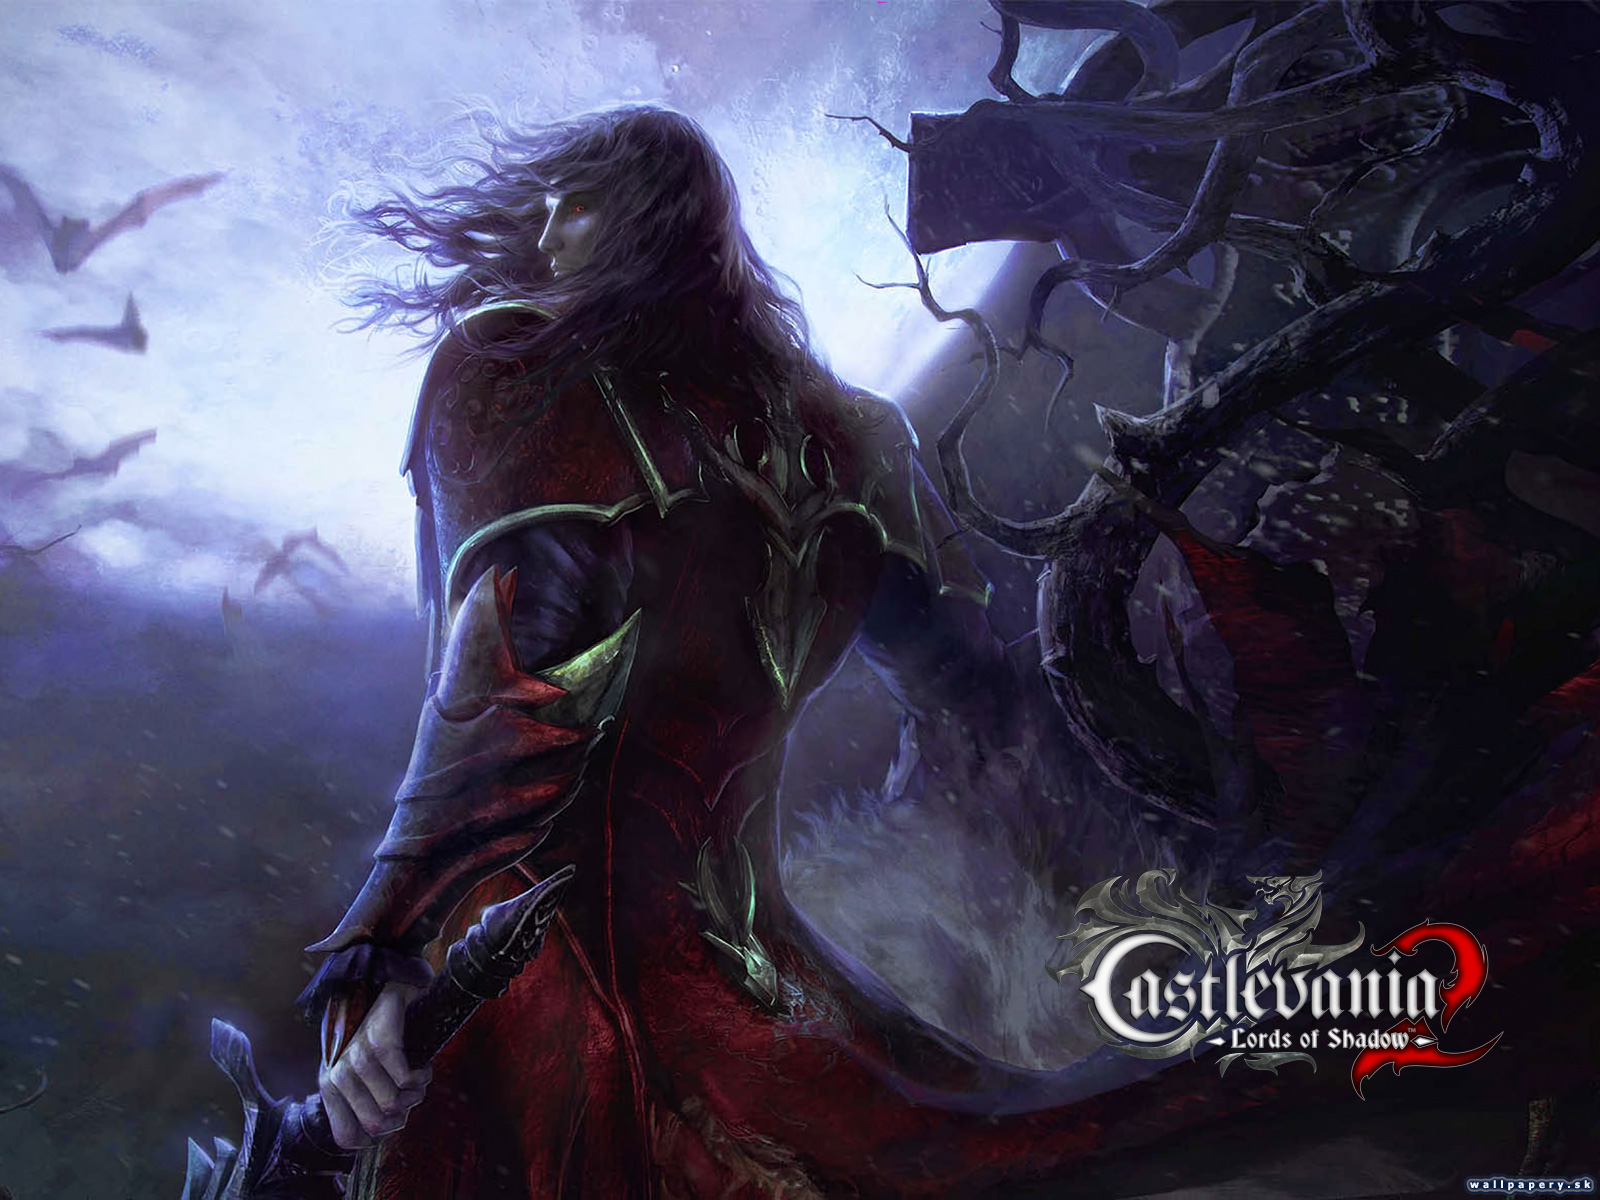 Castlevania: Lords of Shadow 2 - wallpaper 3